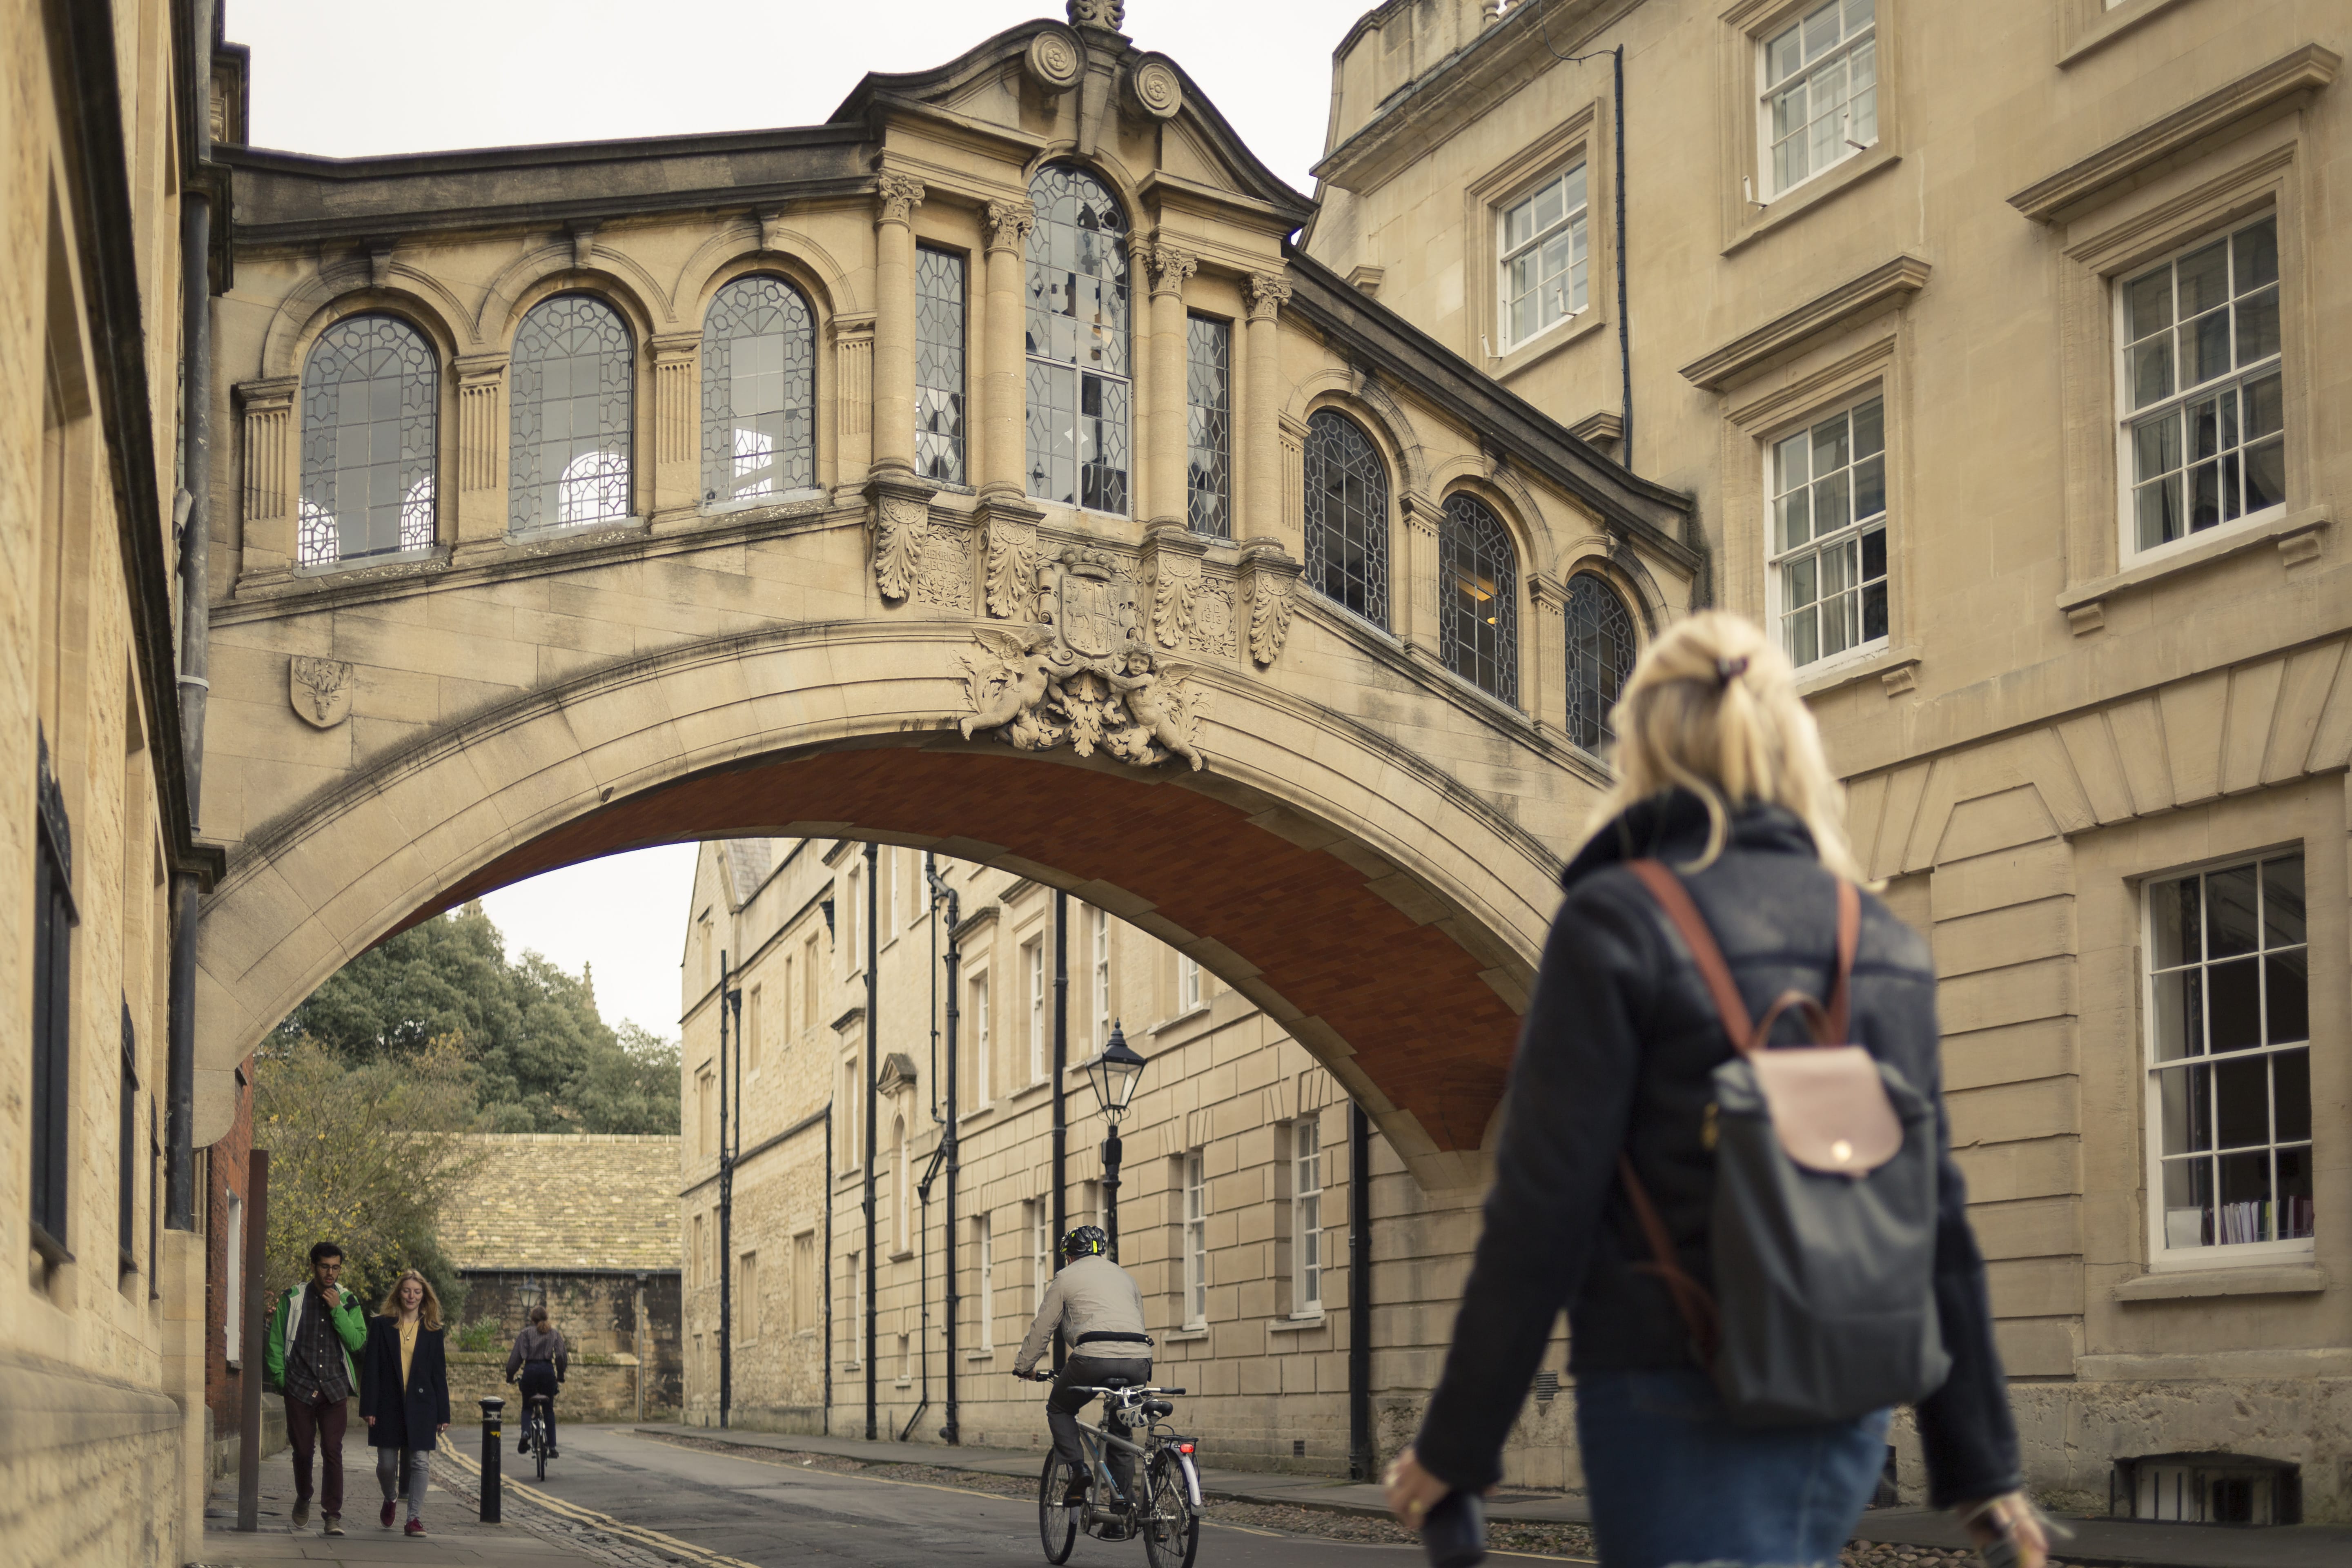 Oxford's historical sights